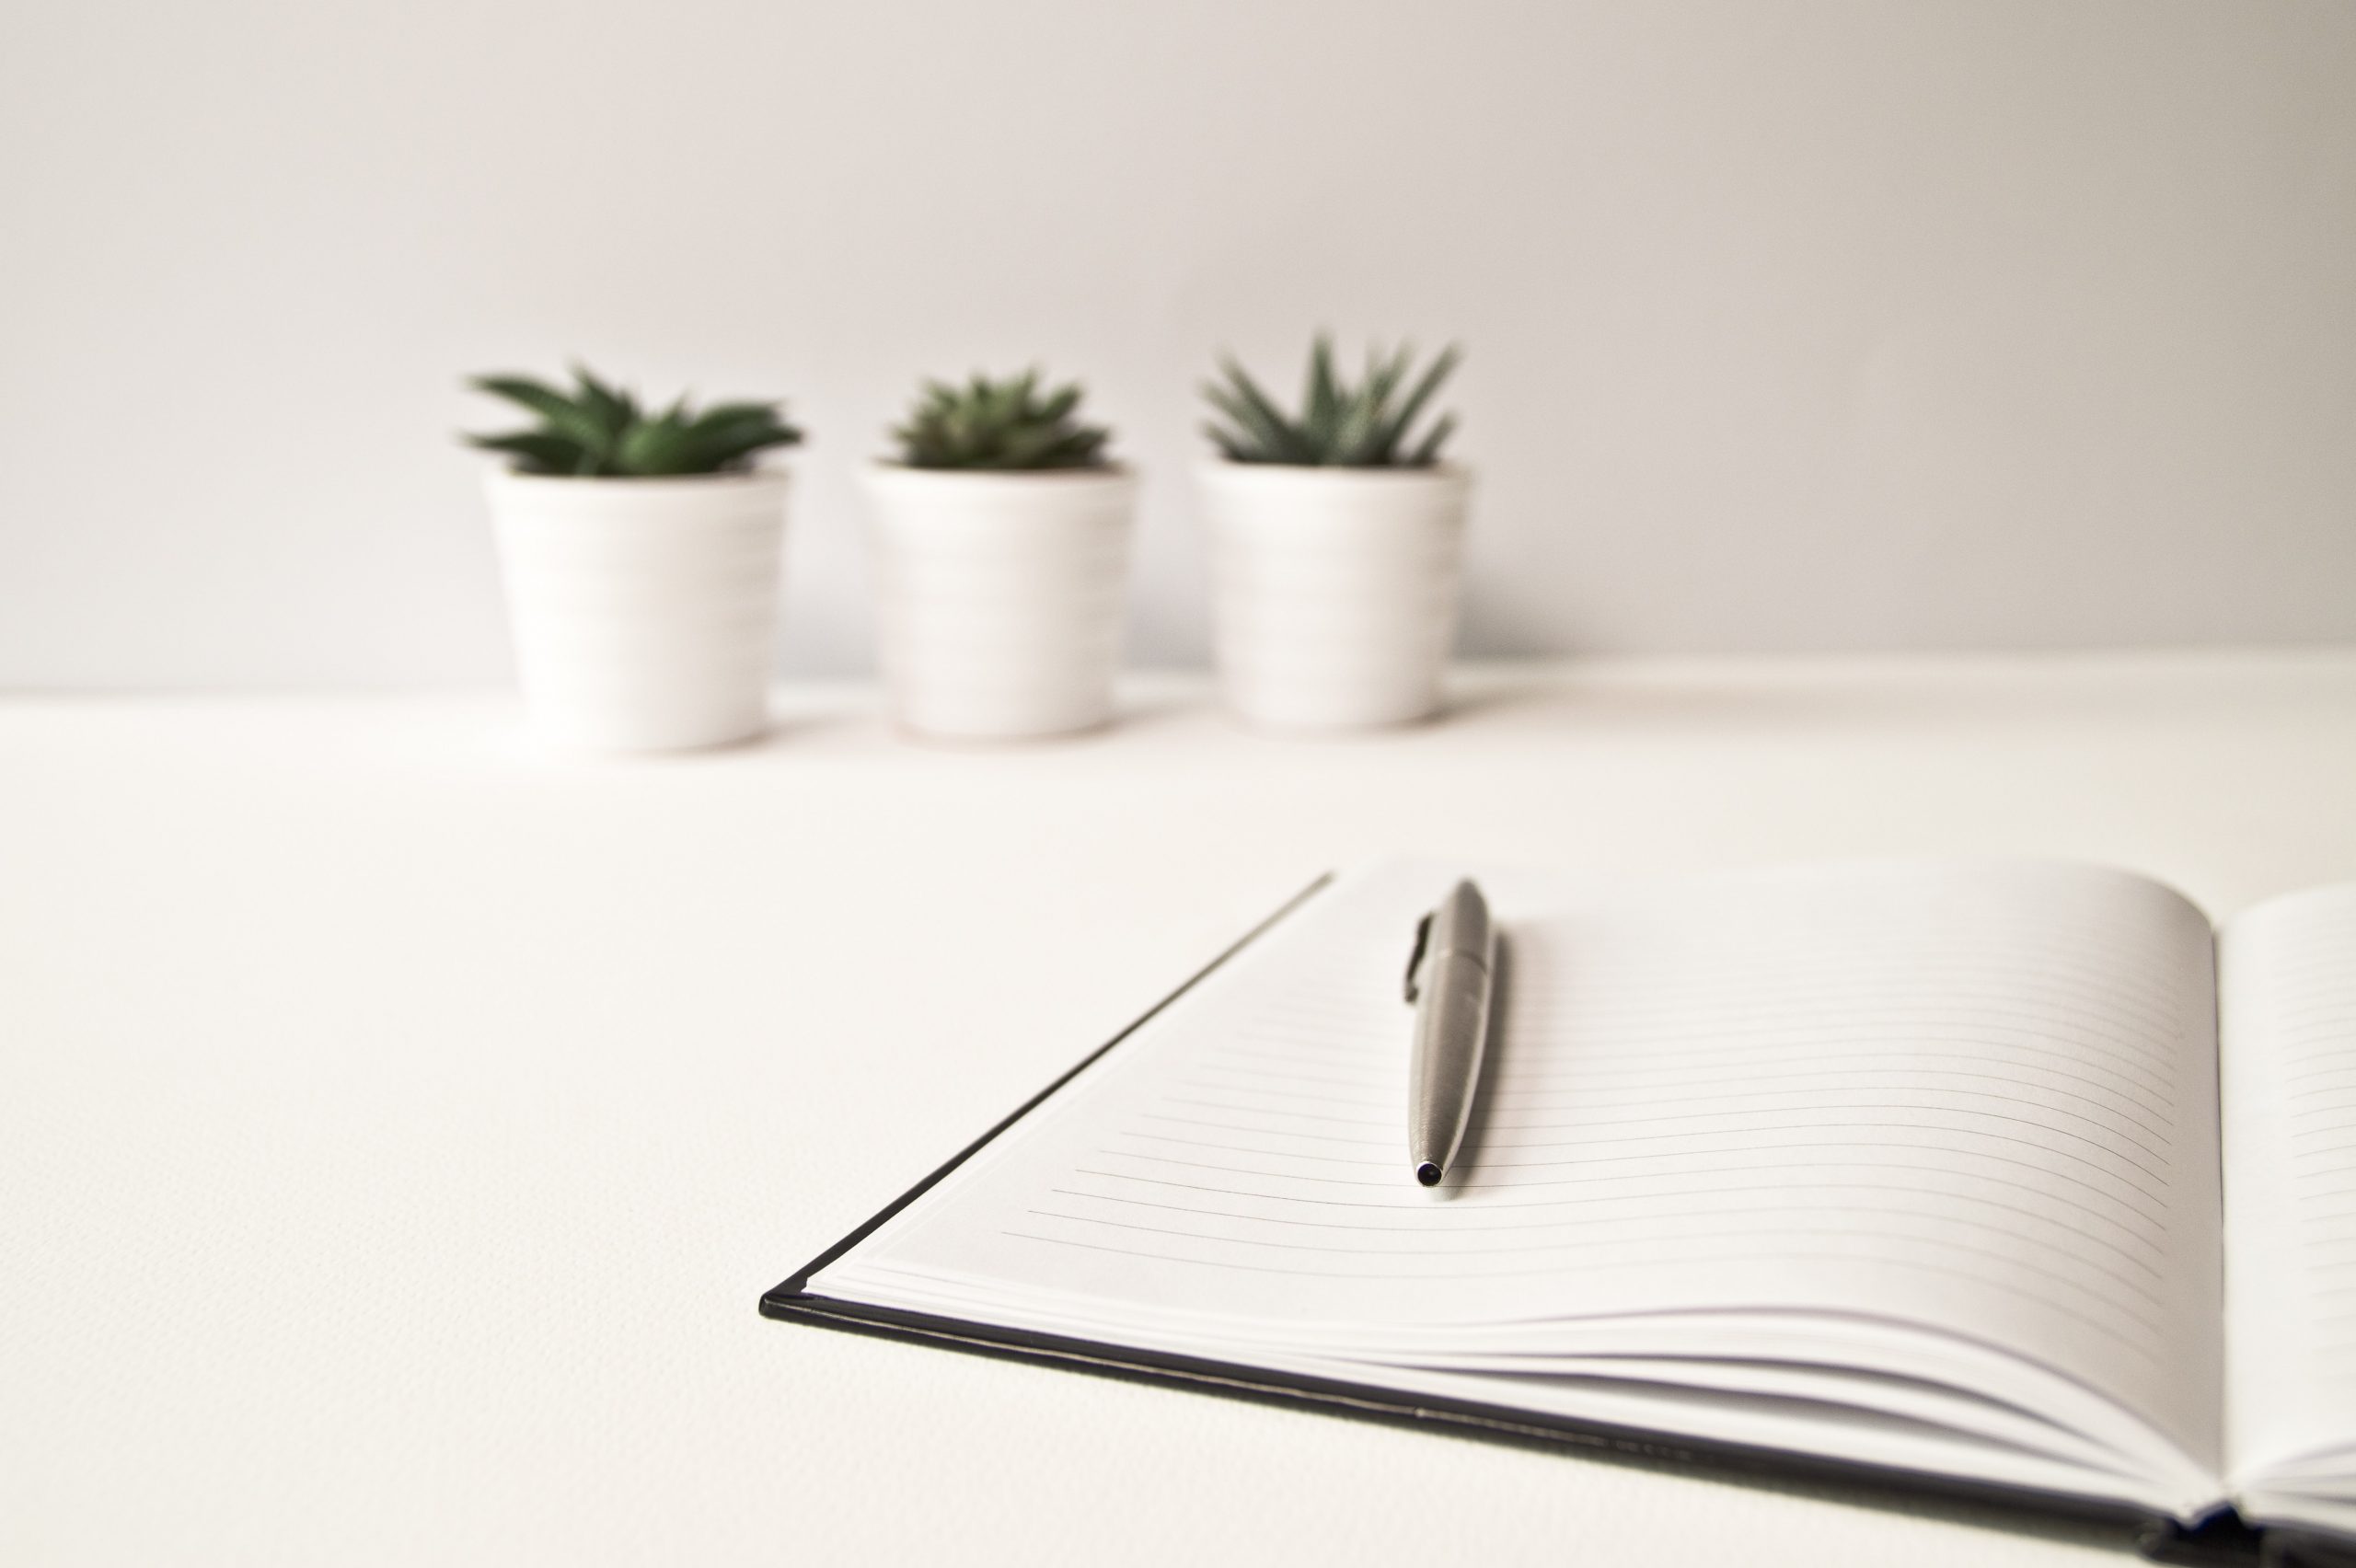 A ballpoint pen resting on an open notebook, with three plants in the background